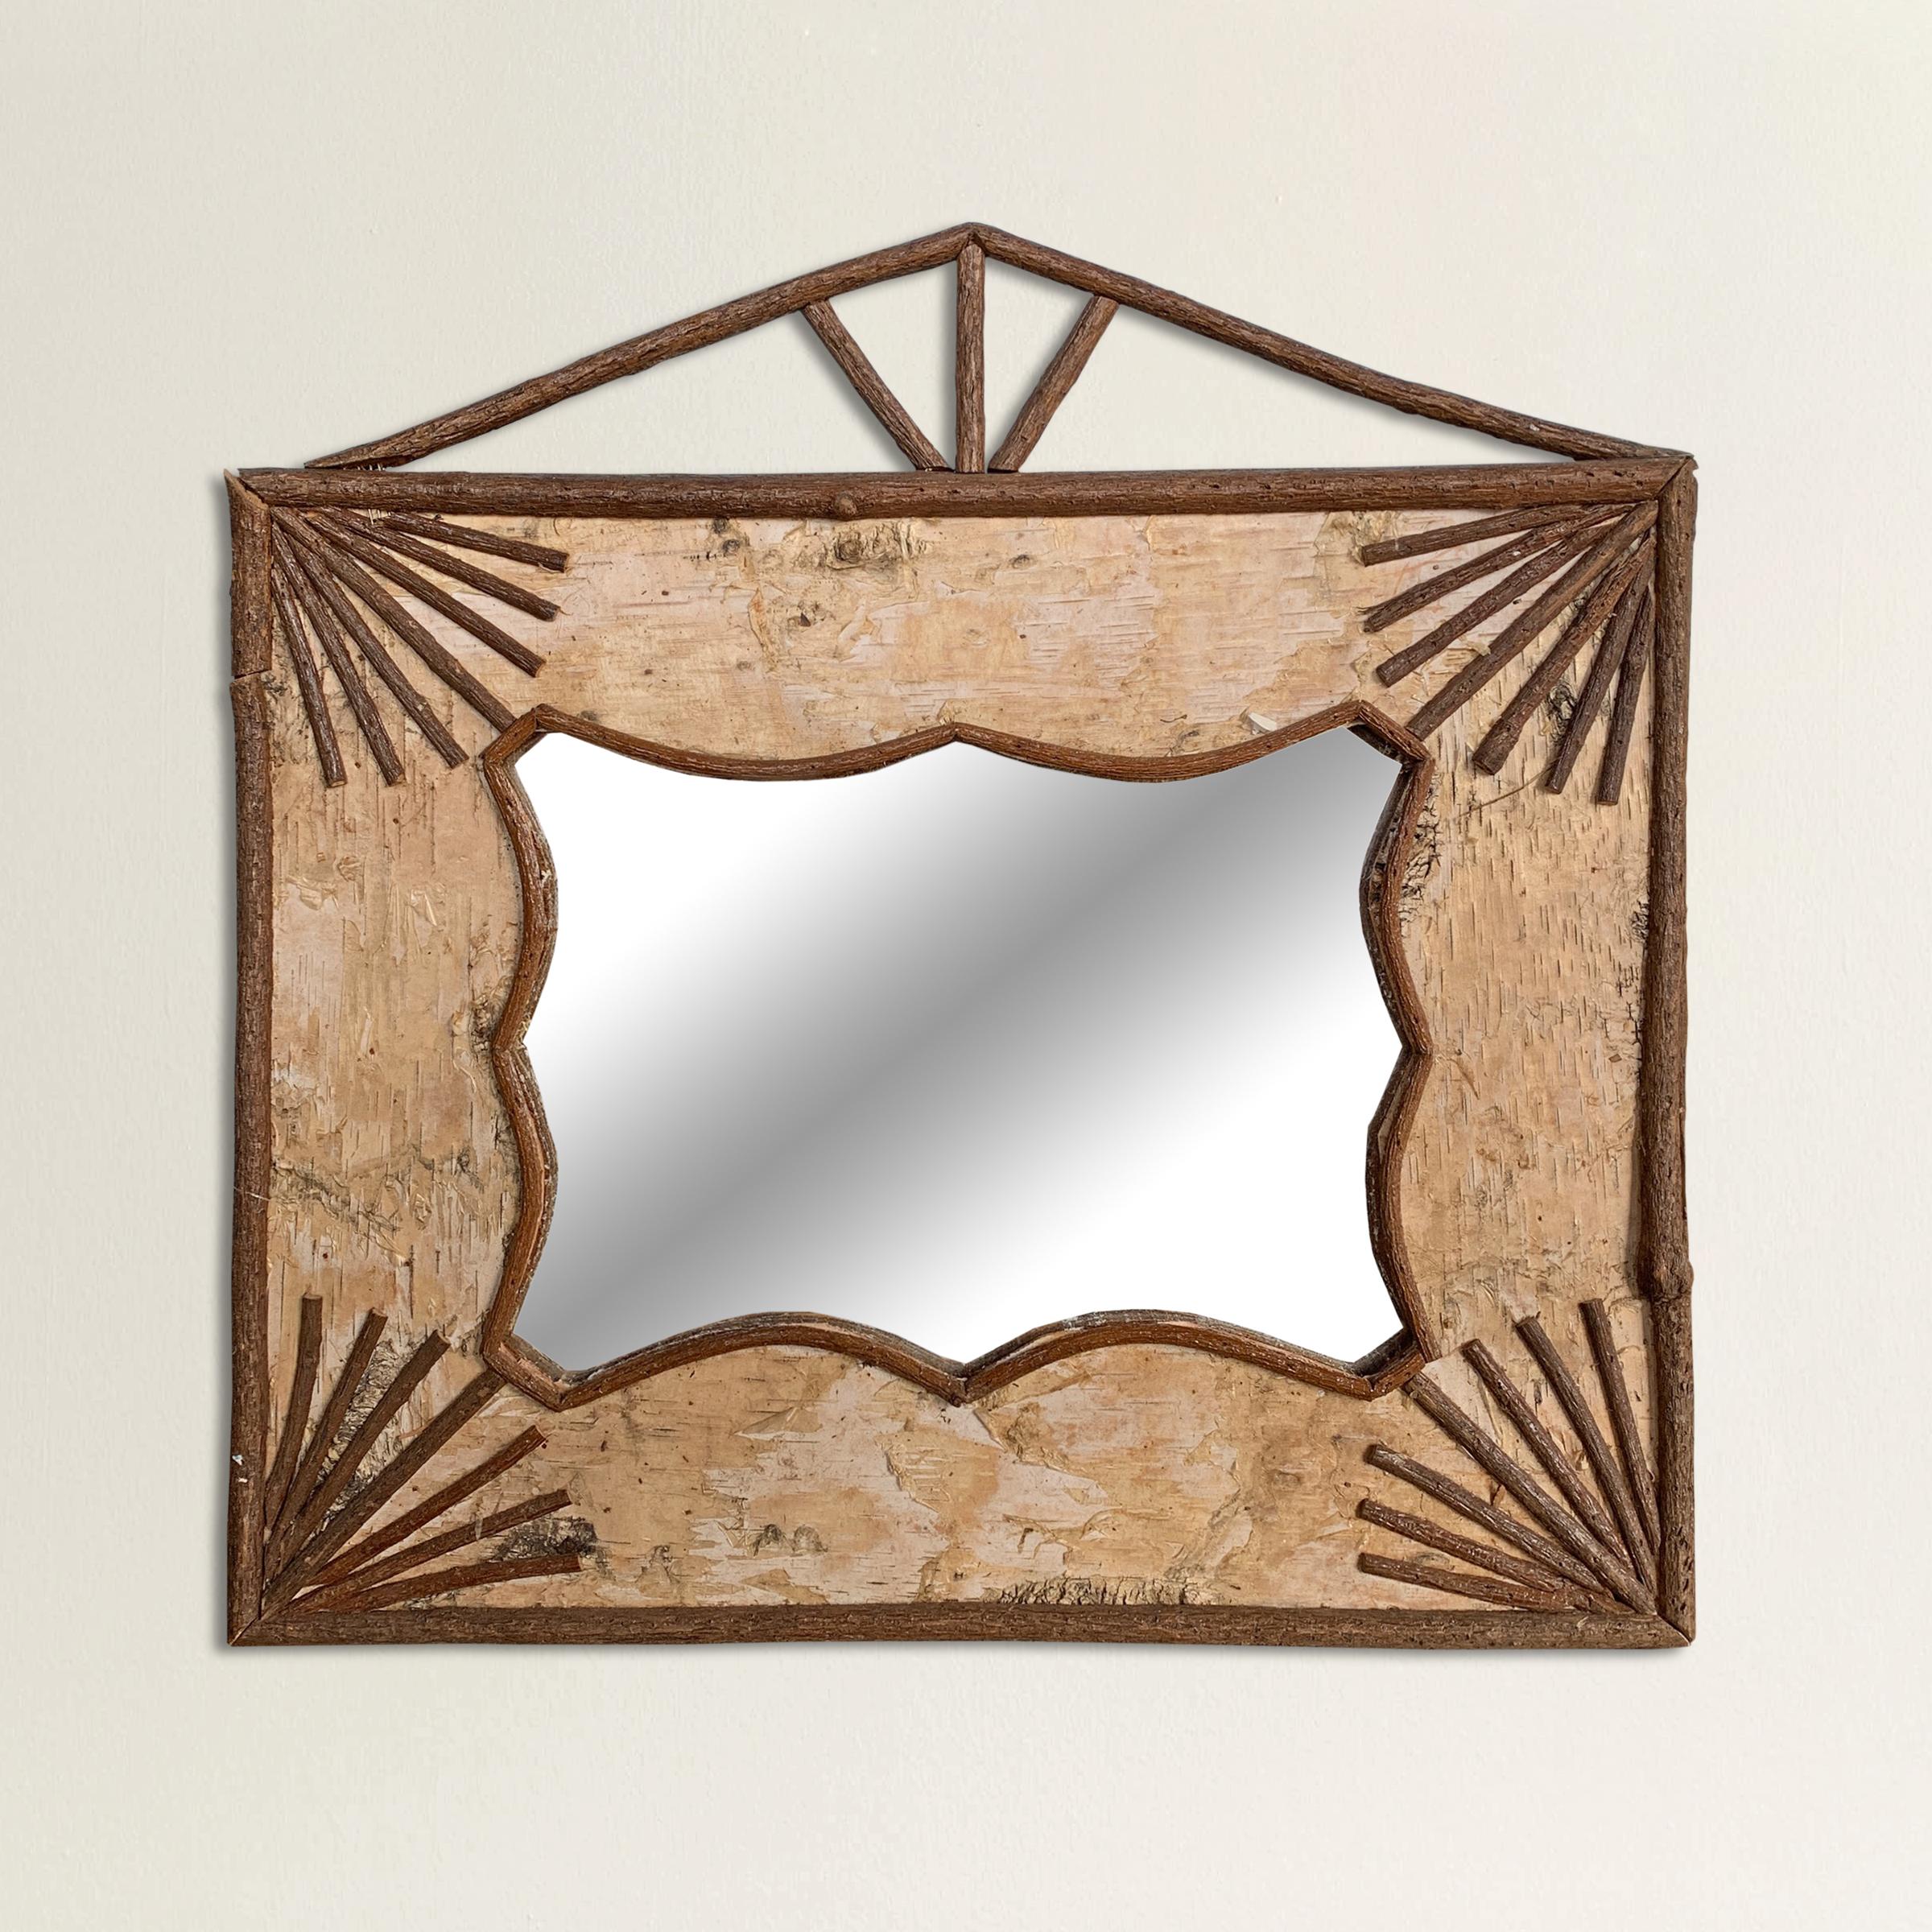 A charming mid-20th century American Adirondack-style birch bark framed mirror with applied twigs forming a roof line at the top and starbursts in the corners.